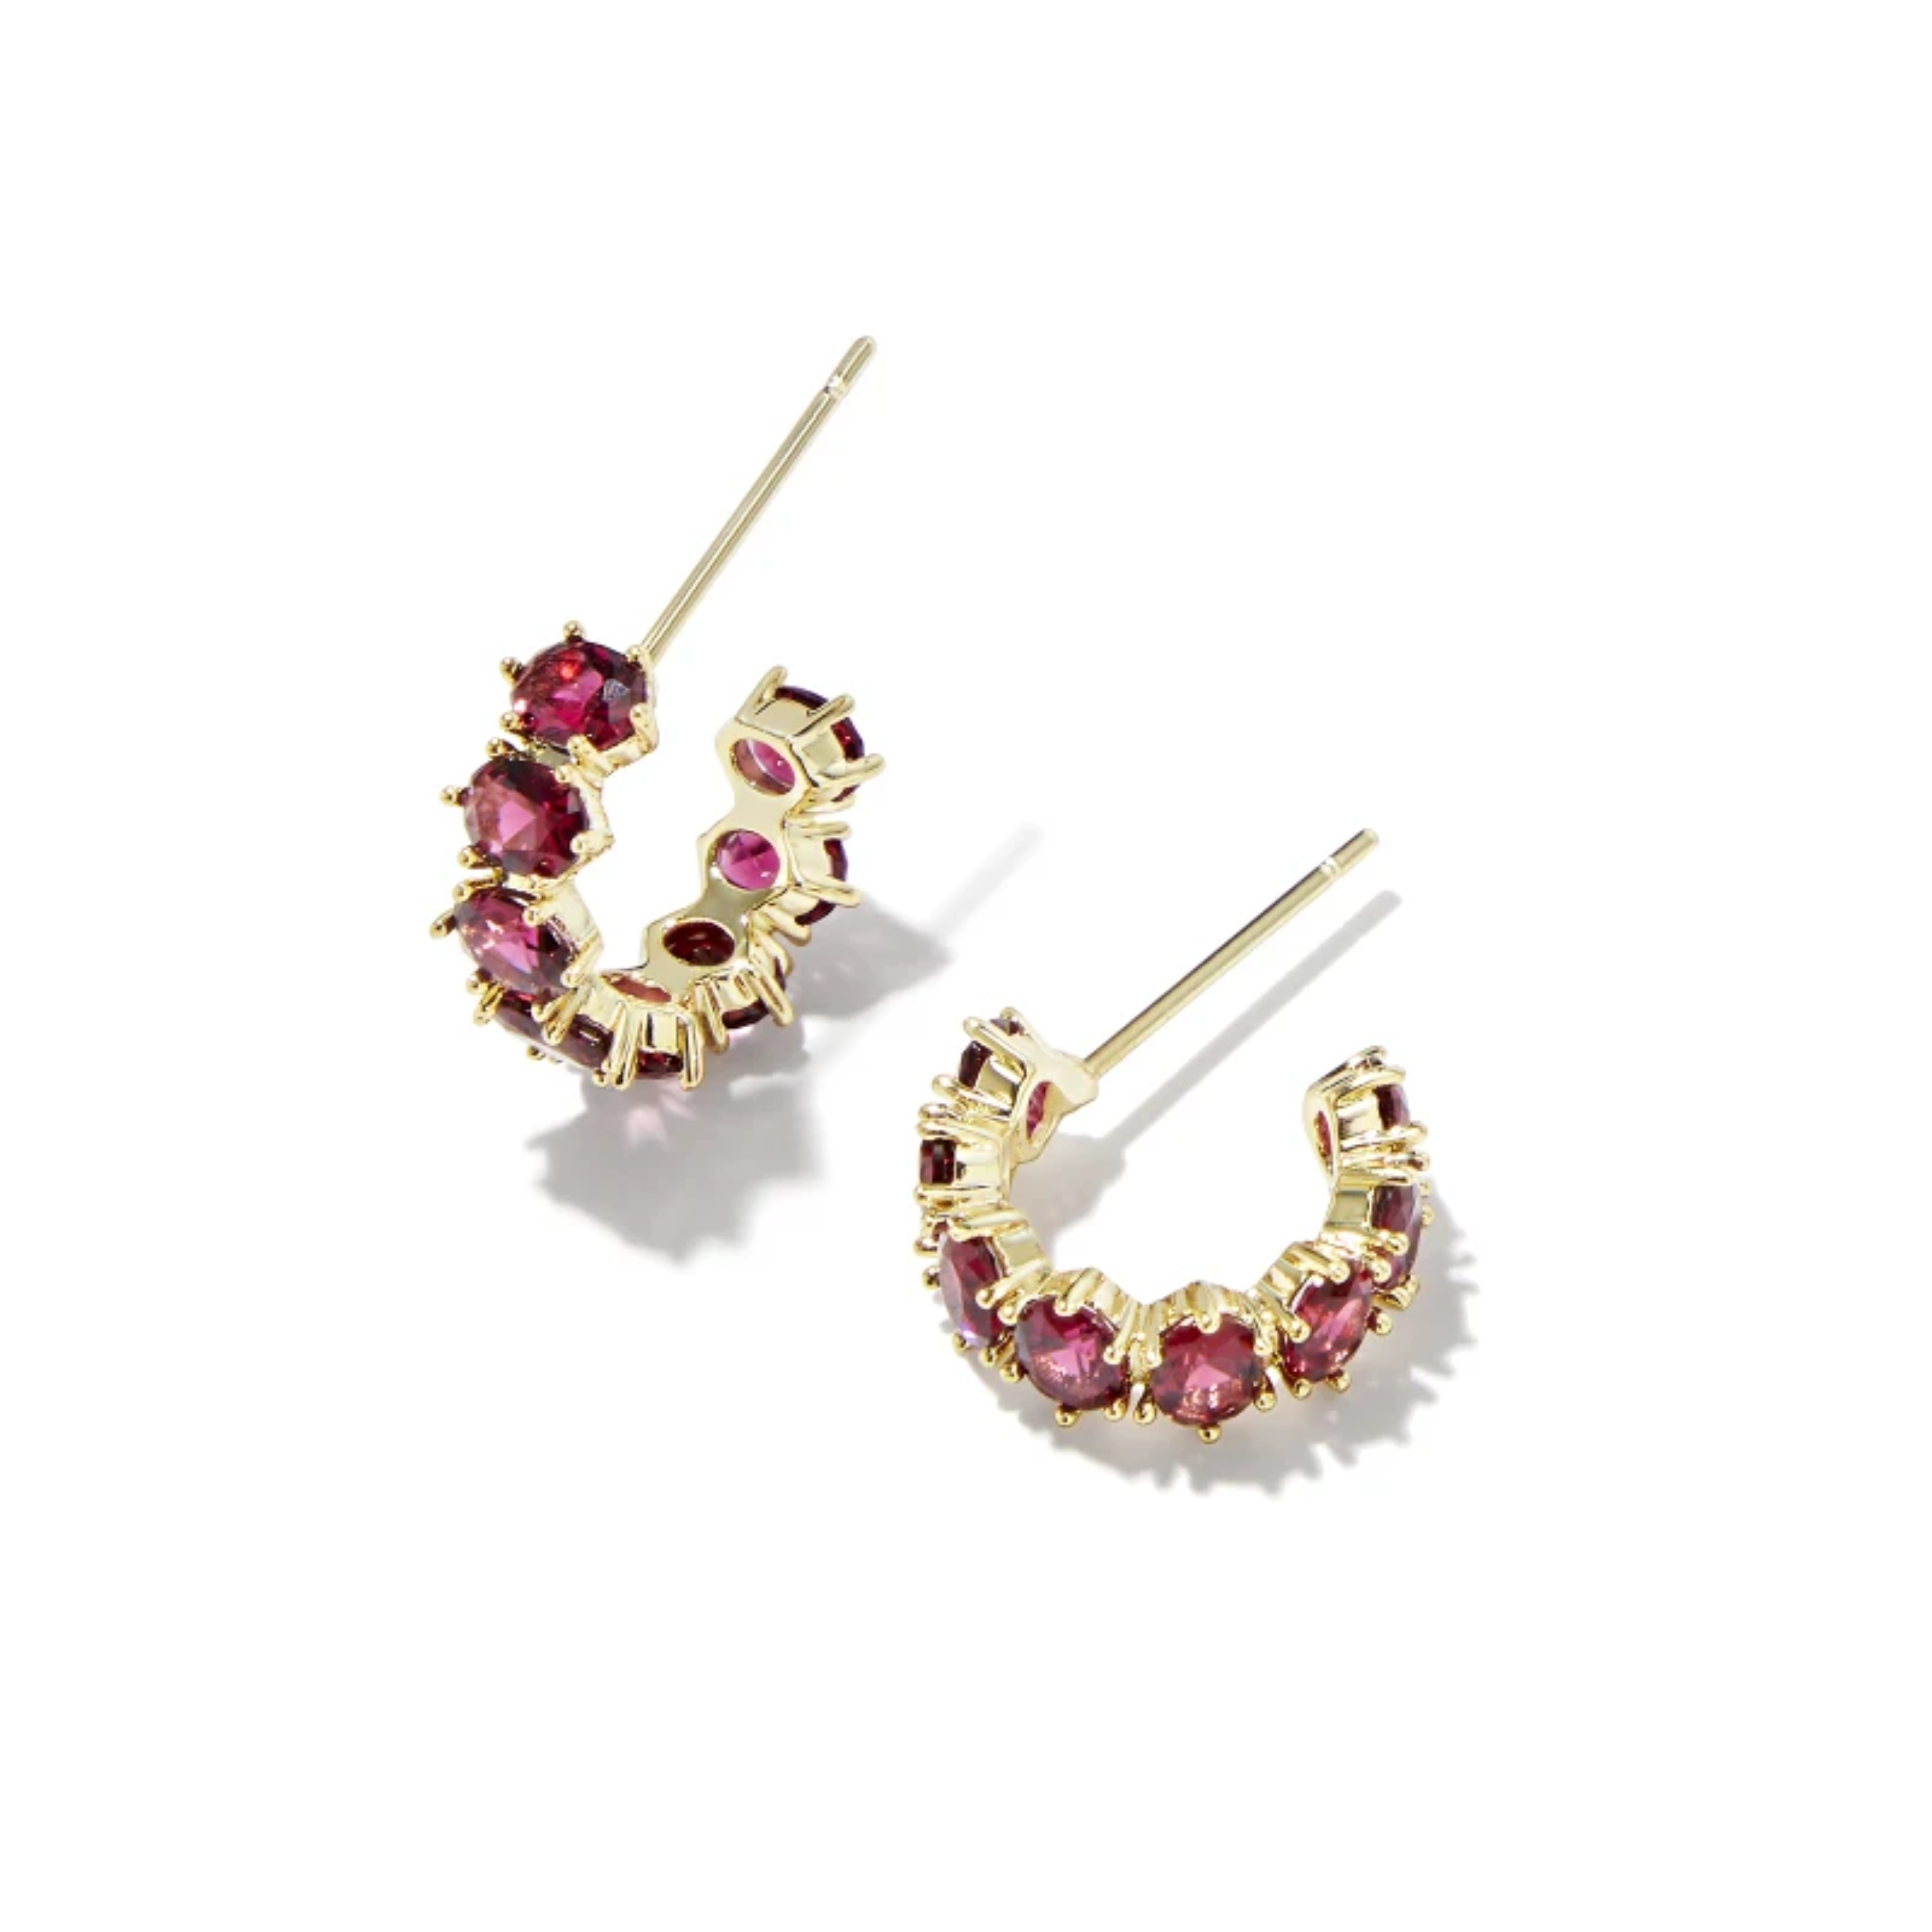 These Cailin Gold Crystal Huggie Earrings in Burgundy Crystal by Kendra Scott are pictured on a white background.